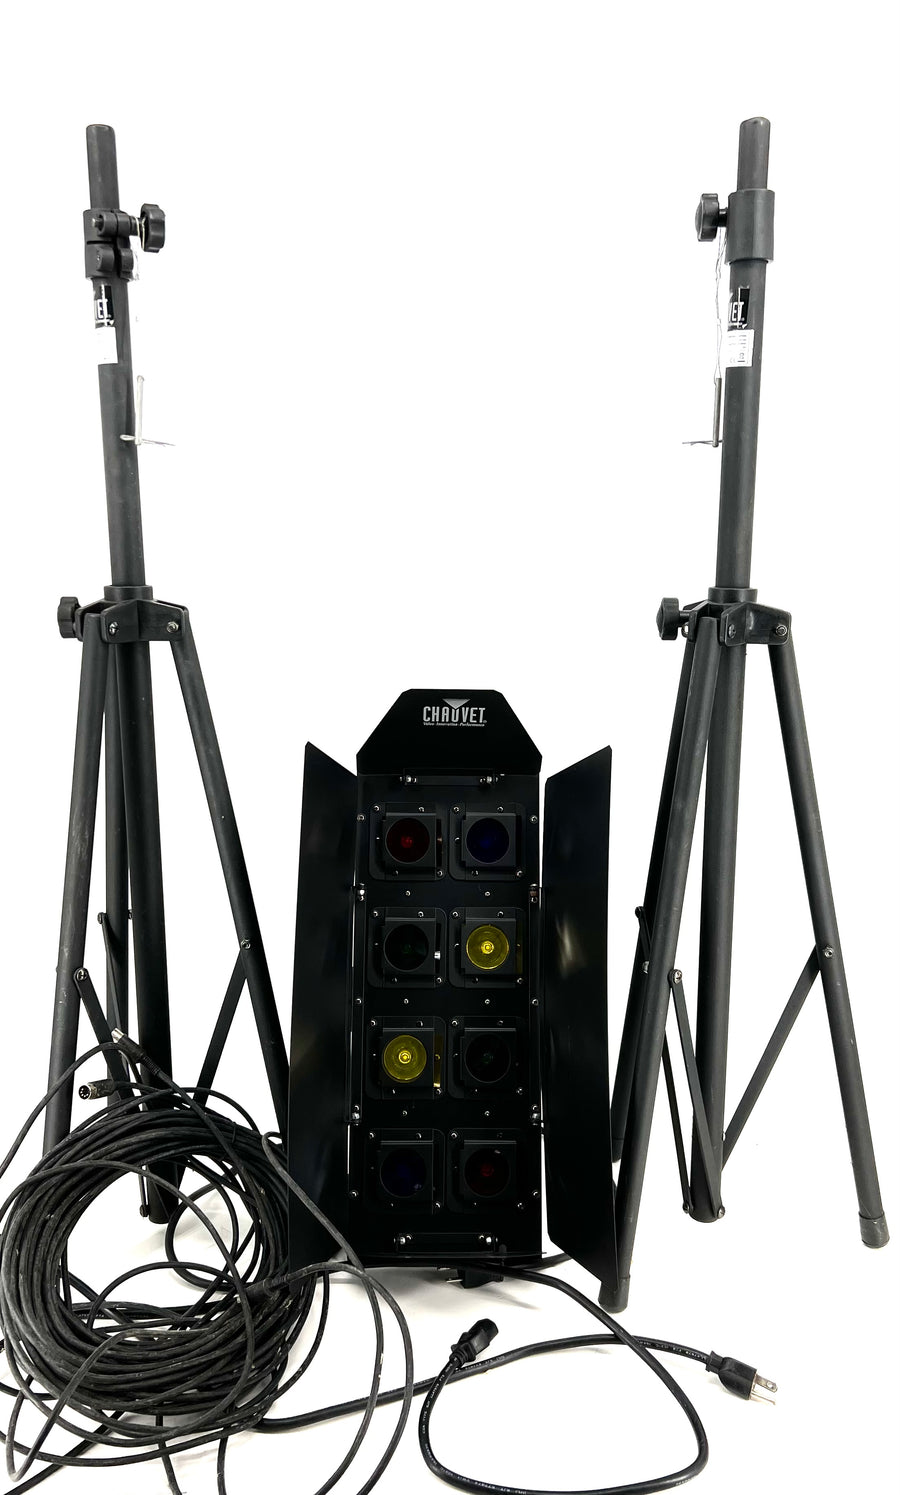 Used Chauvet Pair 8 Color Bank Lights and Stands